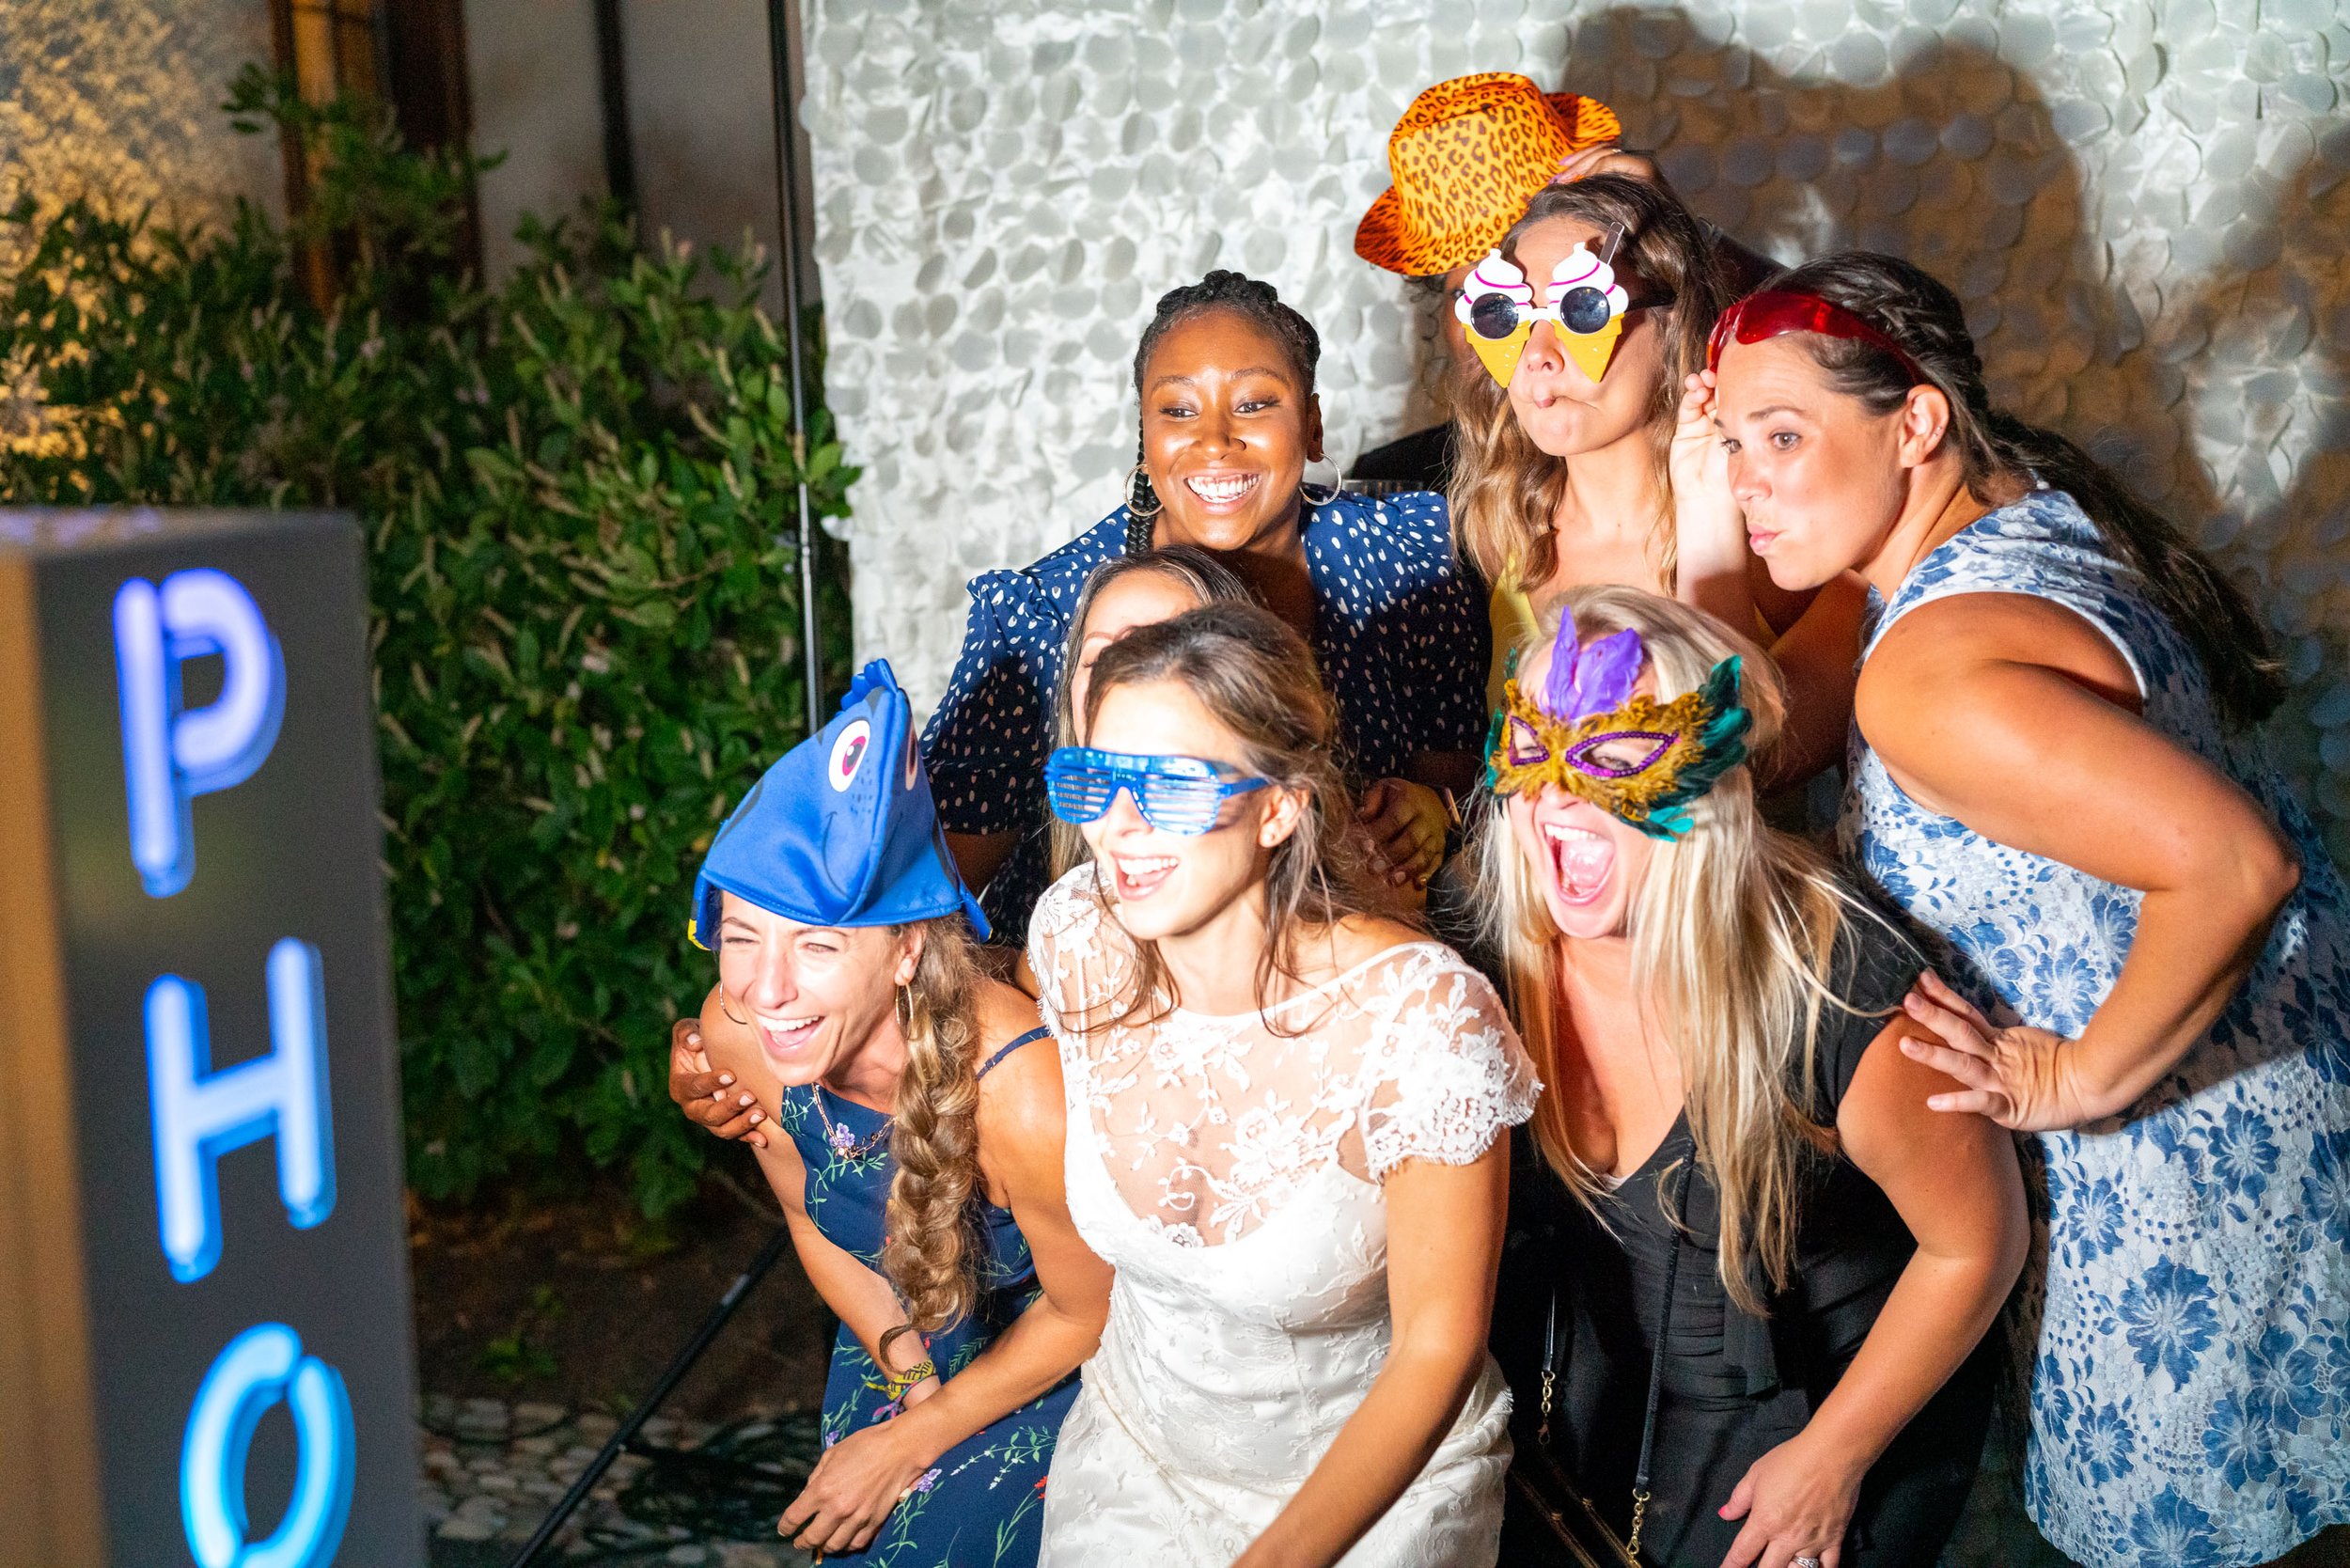 Bride and her friends posing at the Photo Booth in sunglasses